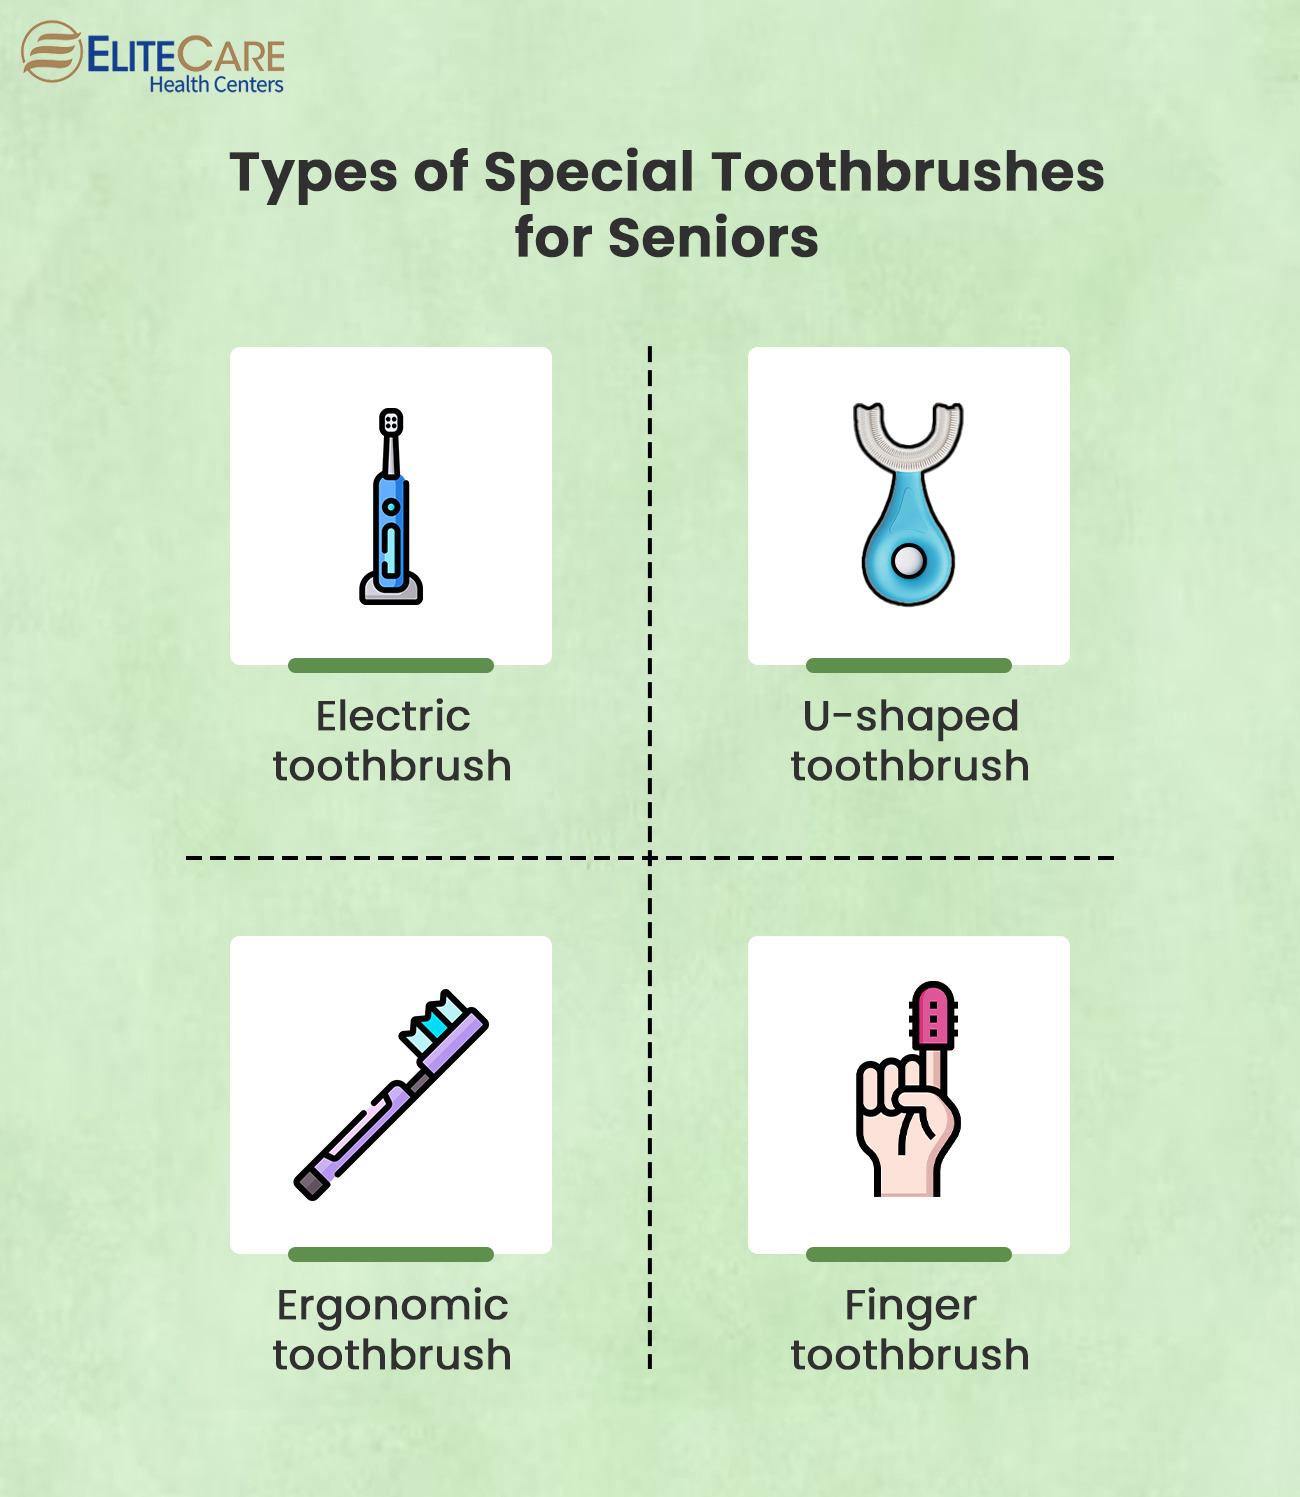 Types of Special Toothbrushes for Seniors